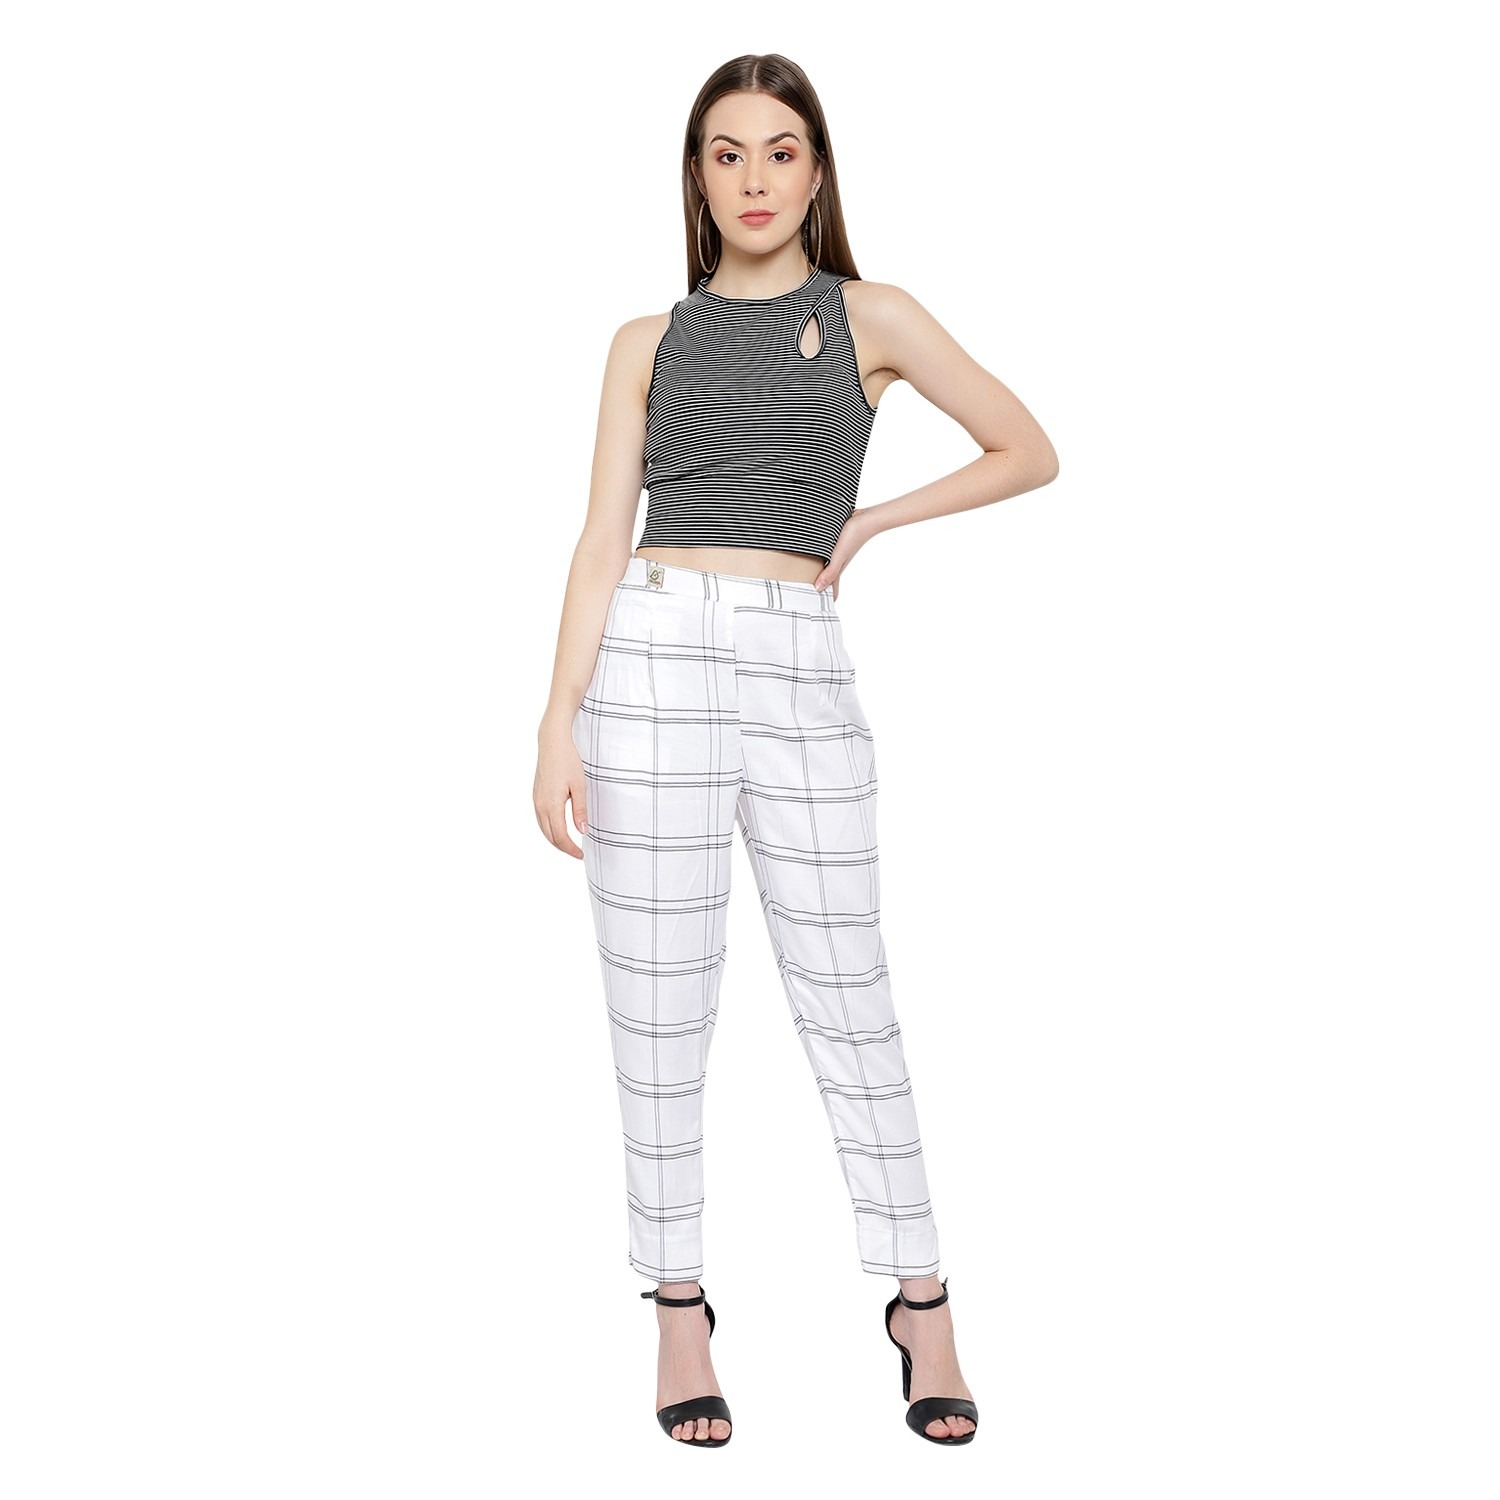 Plus Size Black White Houndstooth Checkered Pants Online in India | Amydus